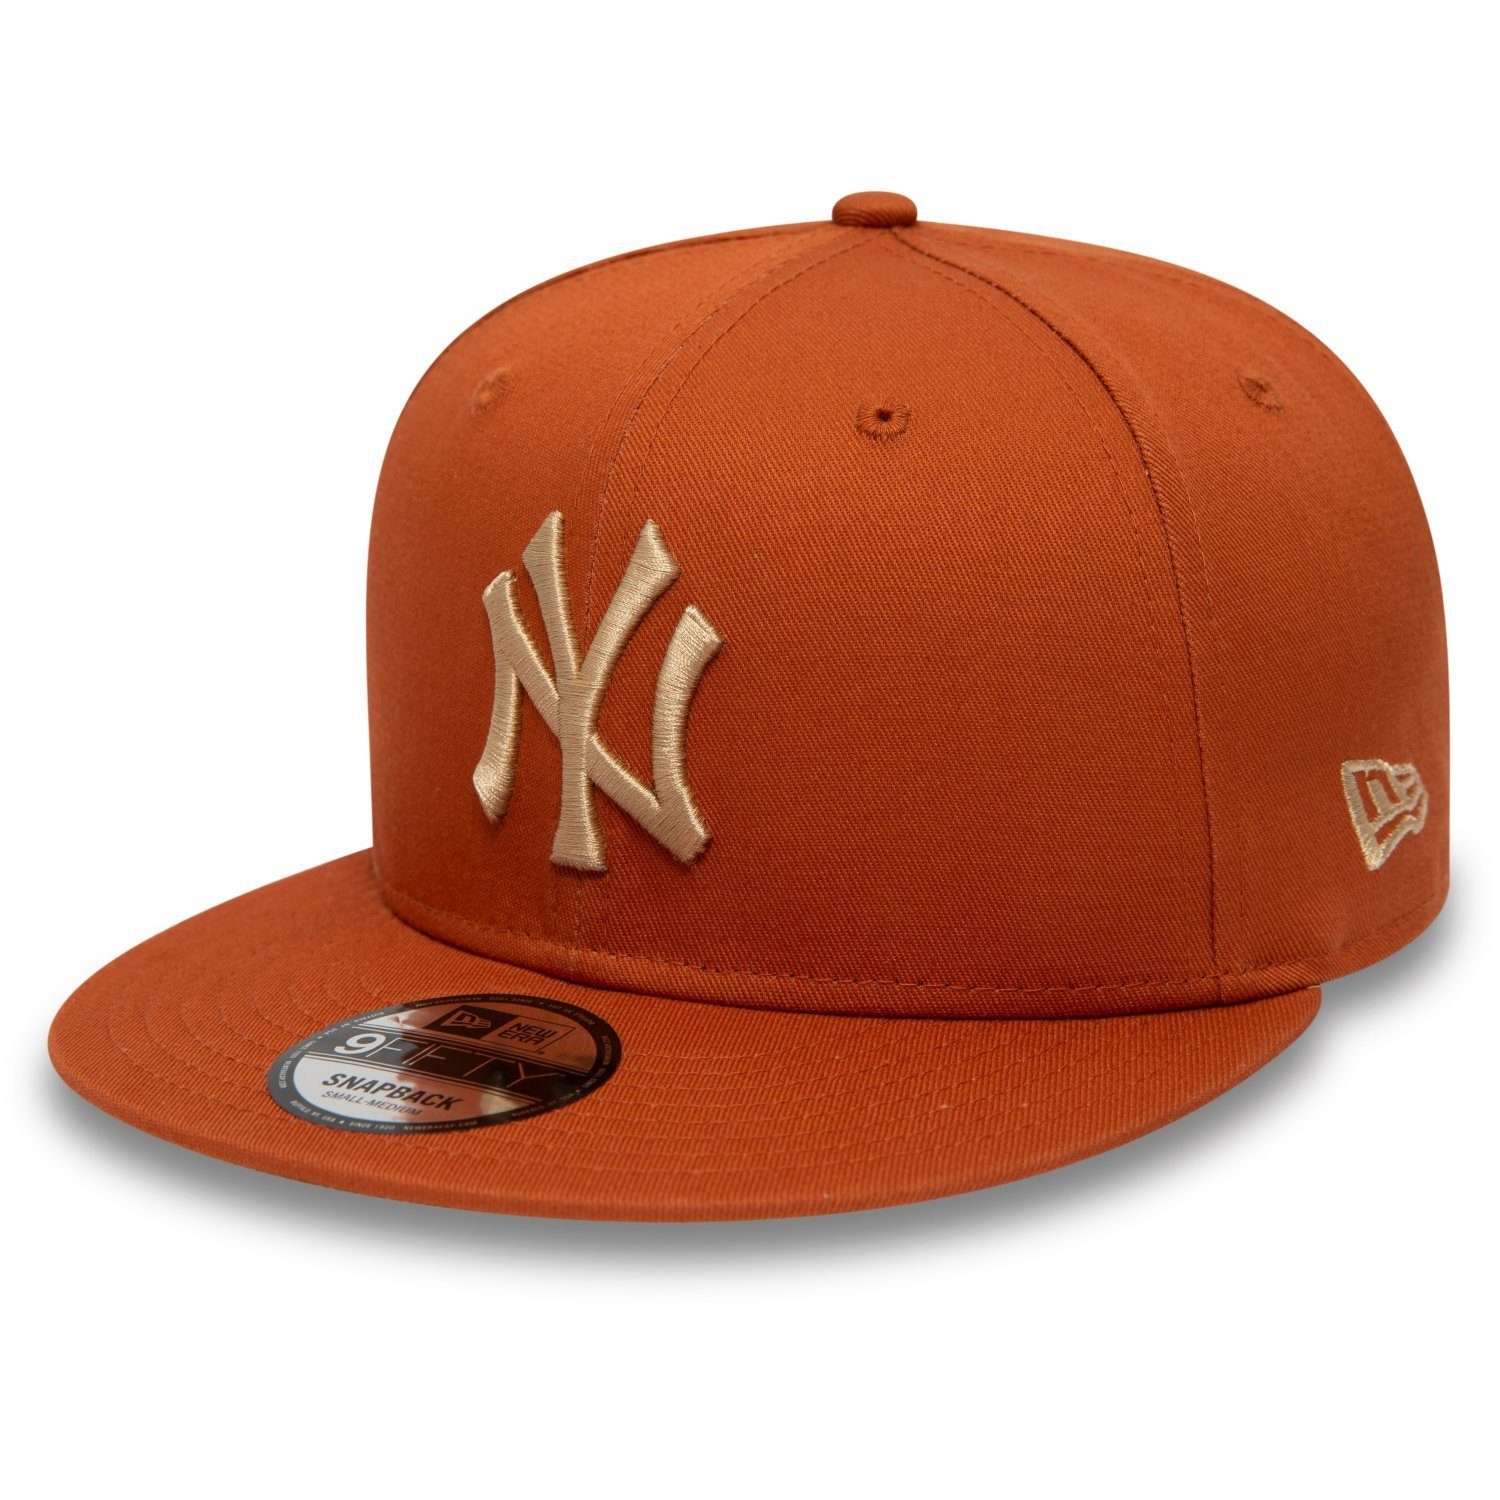 New Era Snapback Cap PATCH SIDE Yankees 9Fifty York rost New